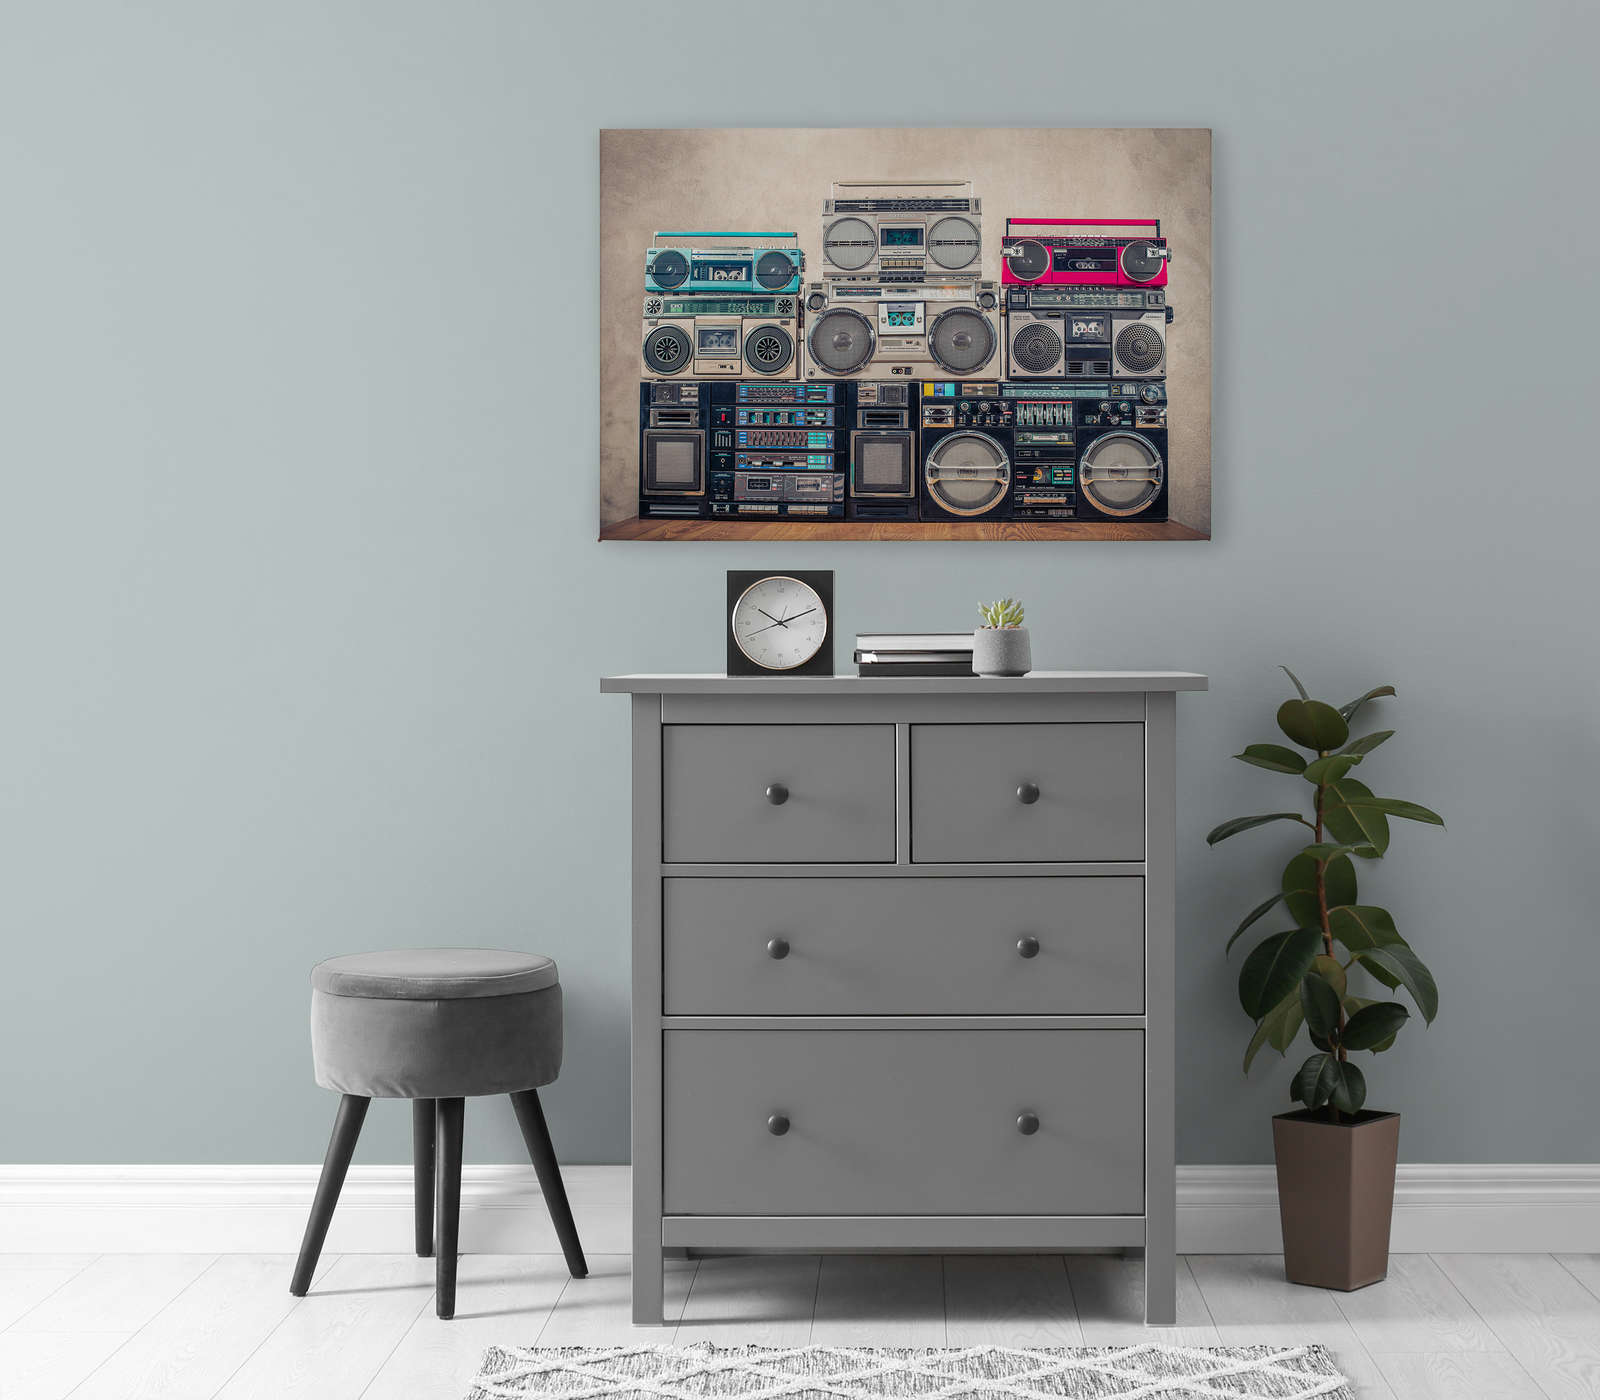             Canvas painting Radios on wooden table in front of wall - 0,90 m x 0,60 m
        